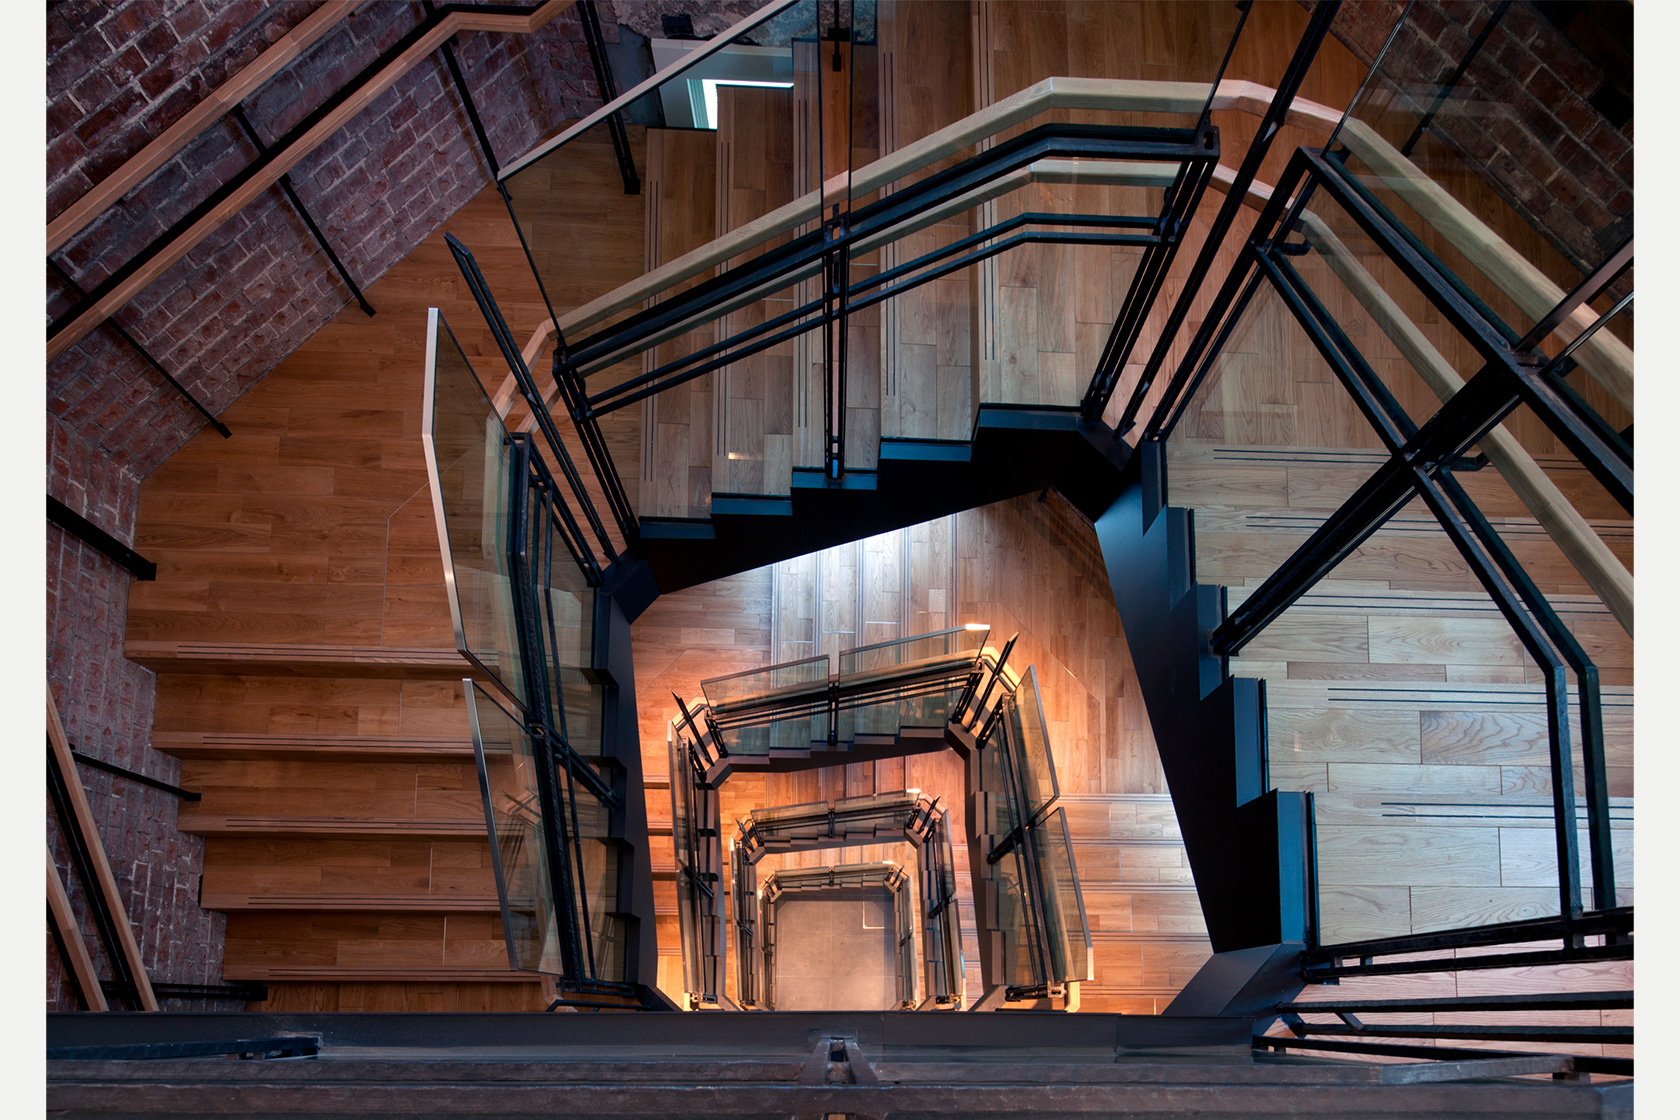 Staircase (seen from the 3rd floor)